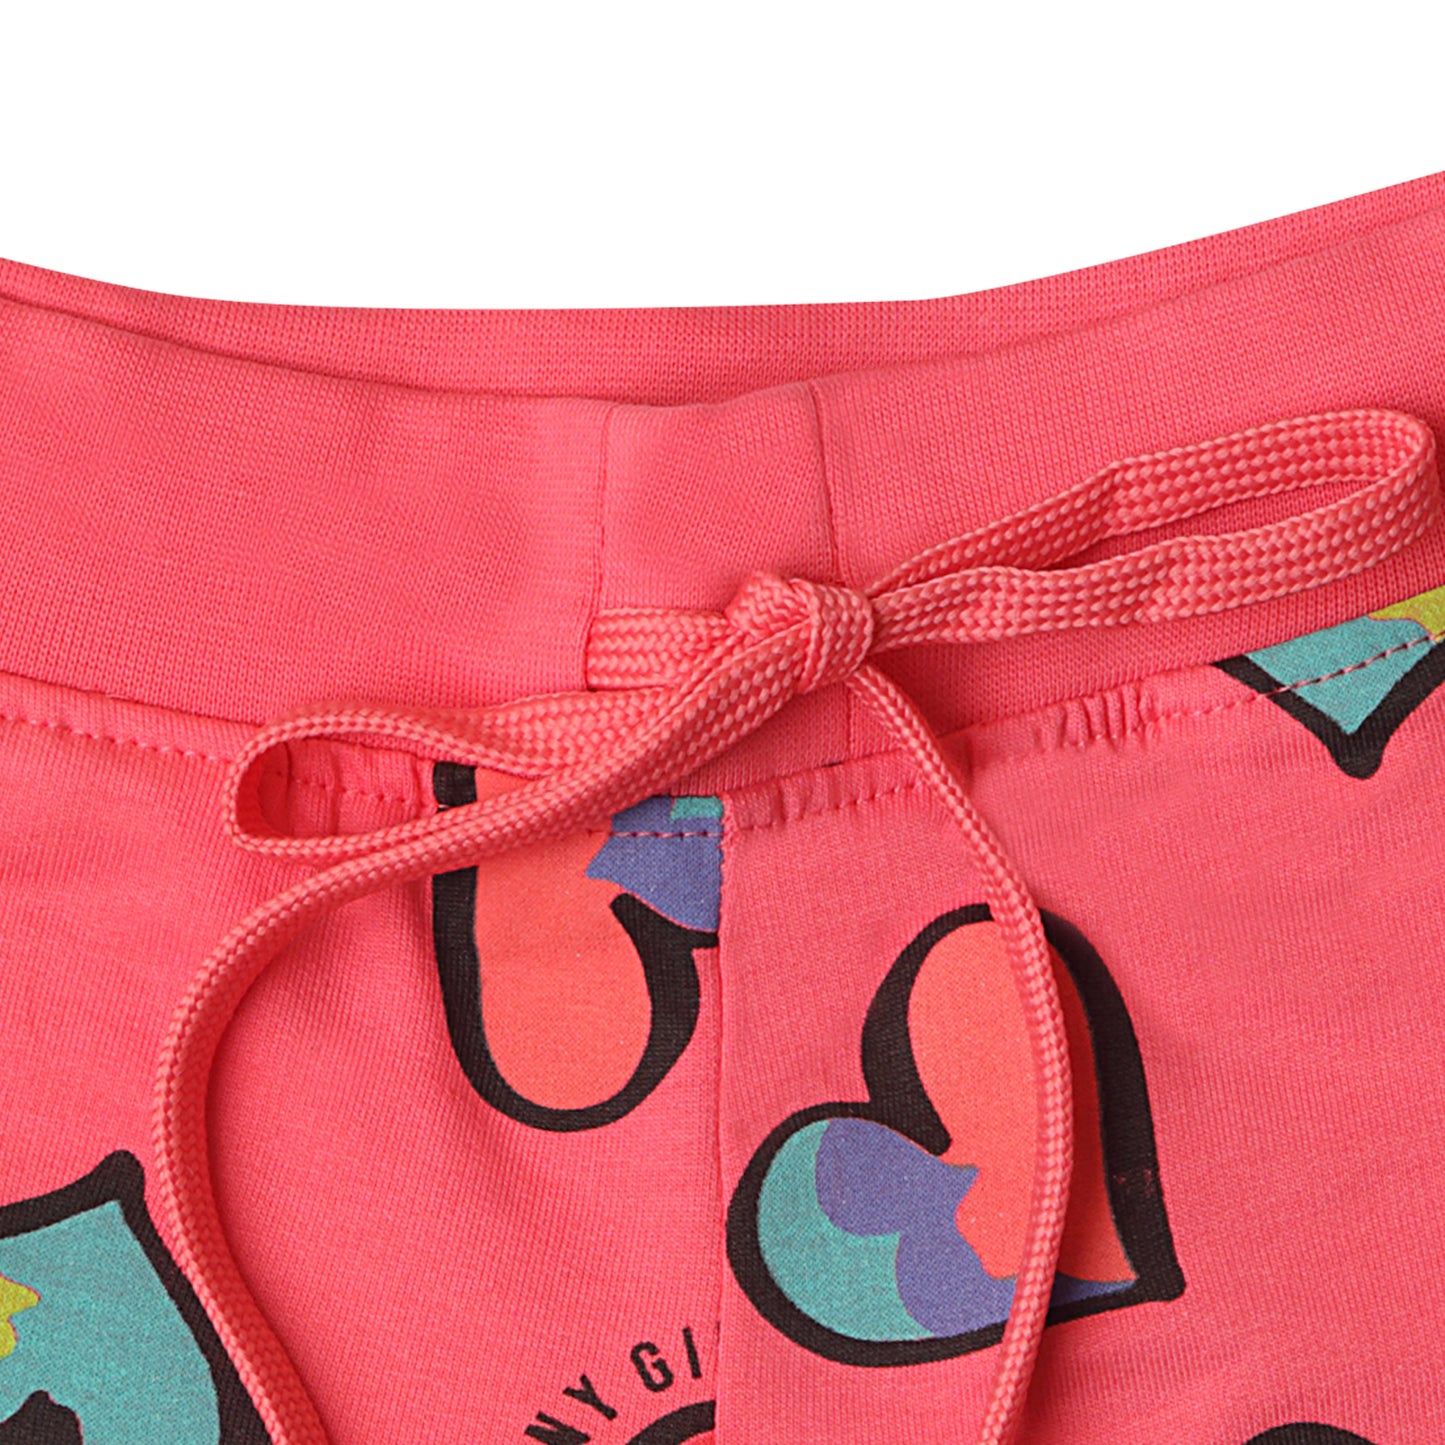 Tomato Red Shorts Heart Printed Regular Fit